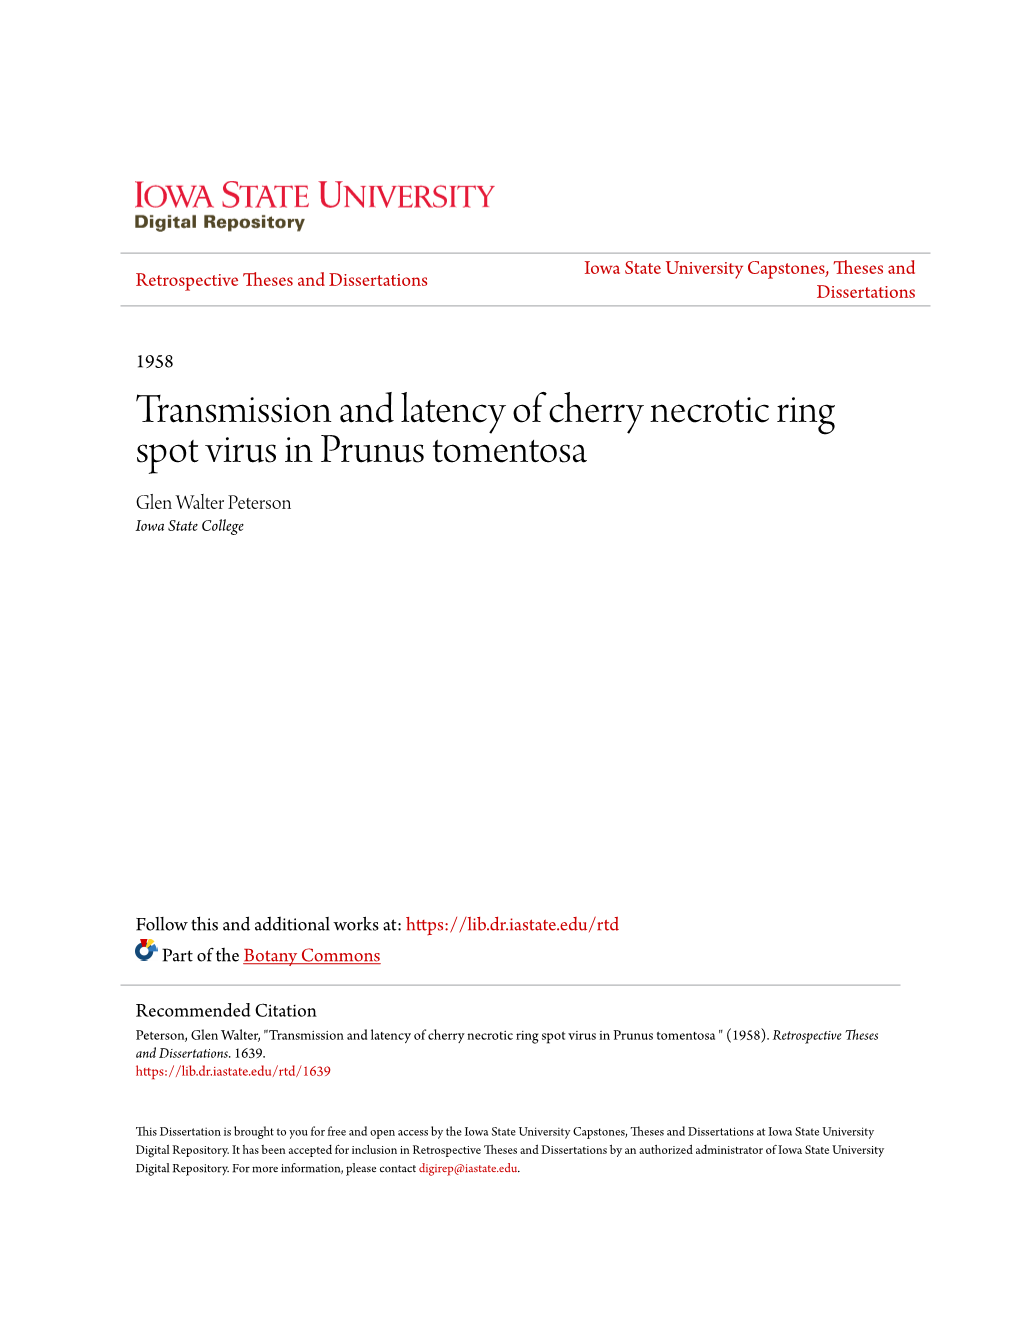 Transmission and Latency of Cherry Necrotic Ring Spot Virus in Prunus Tomentosa Glen Walter Peterson Iowa State College